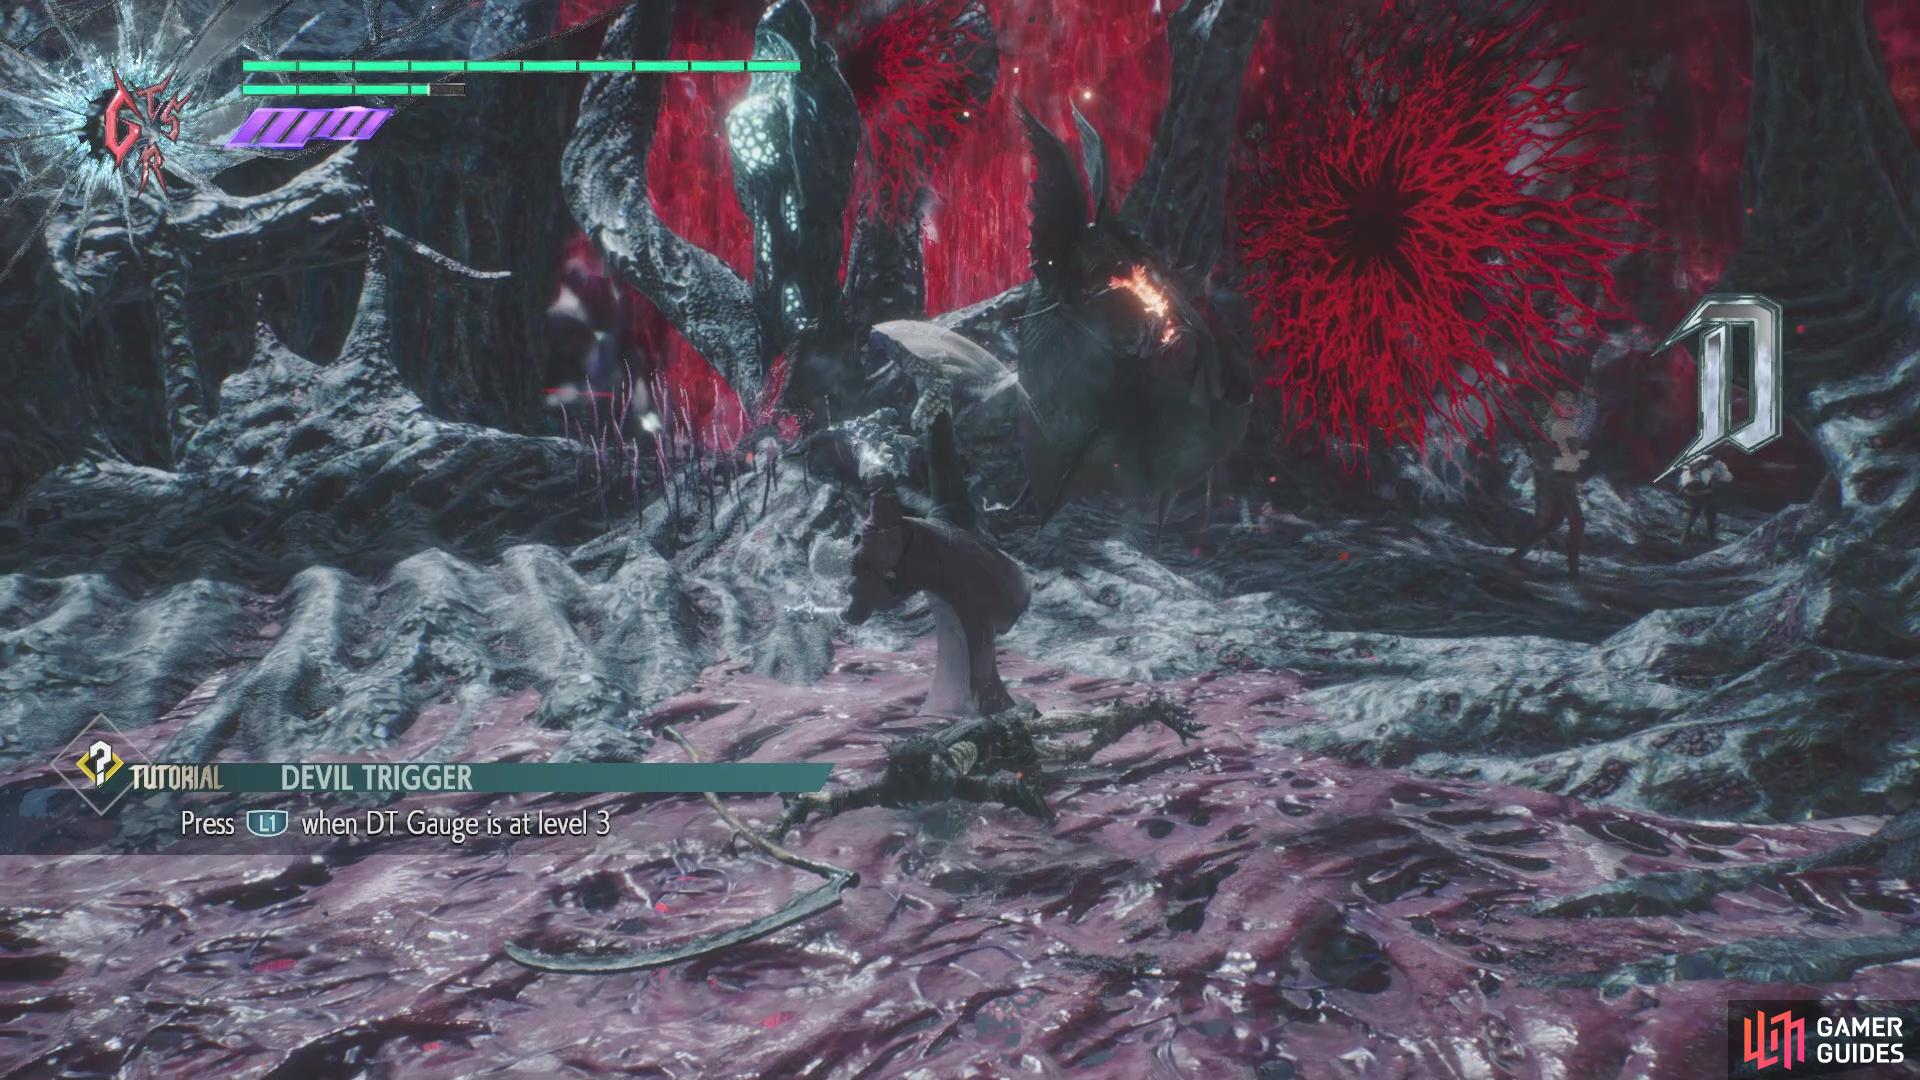 One of the biggest draws for Dante is being able to switch weapons during combat